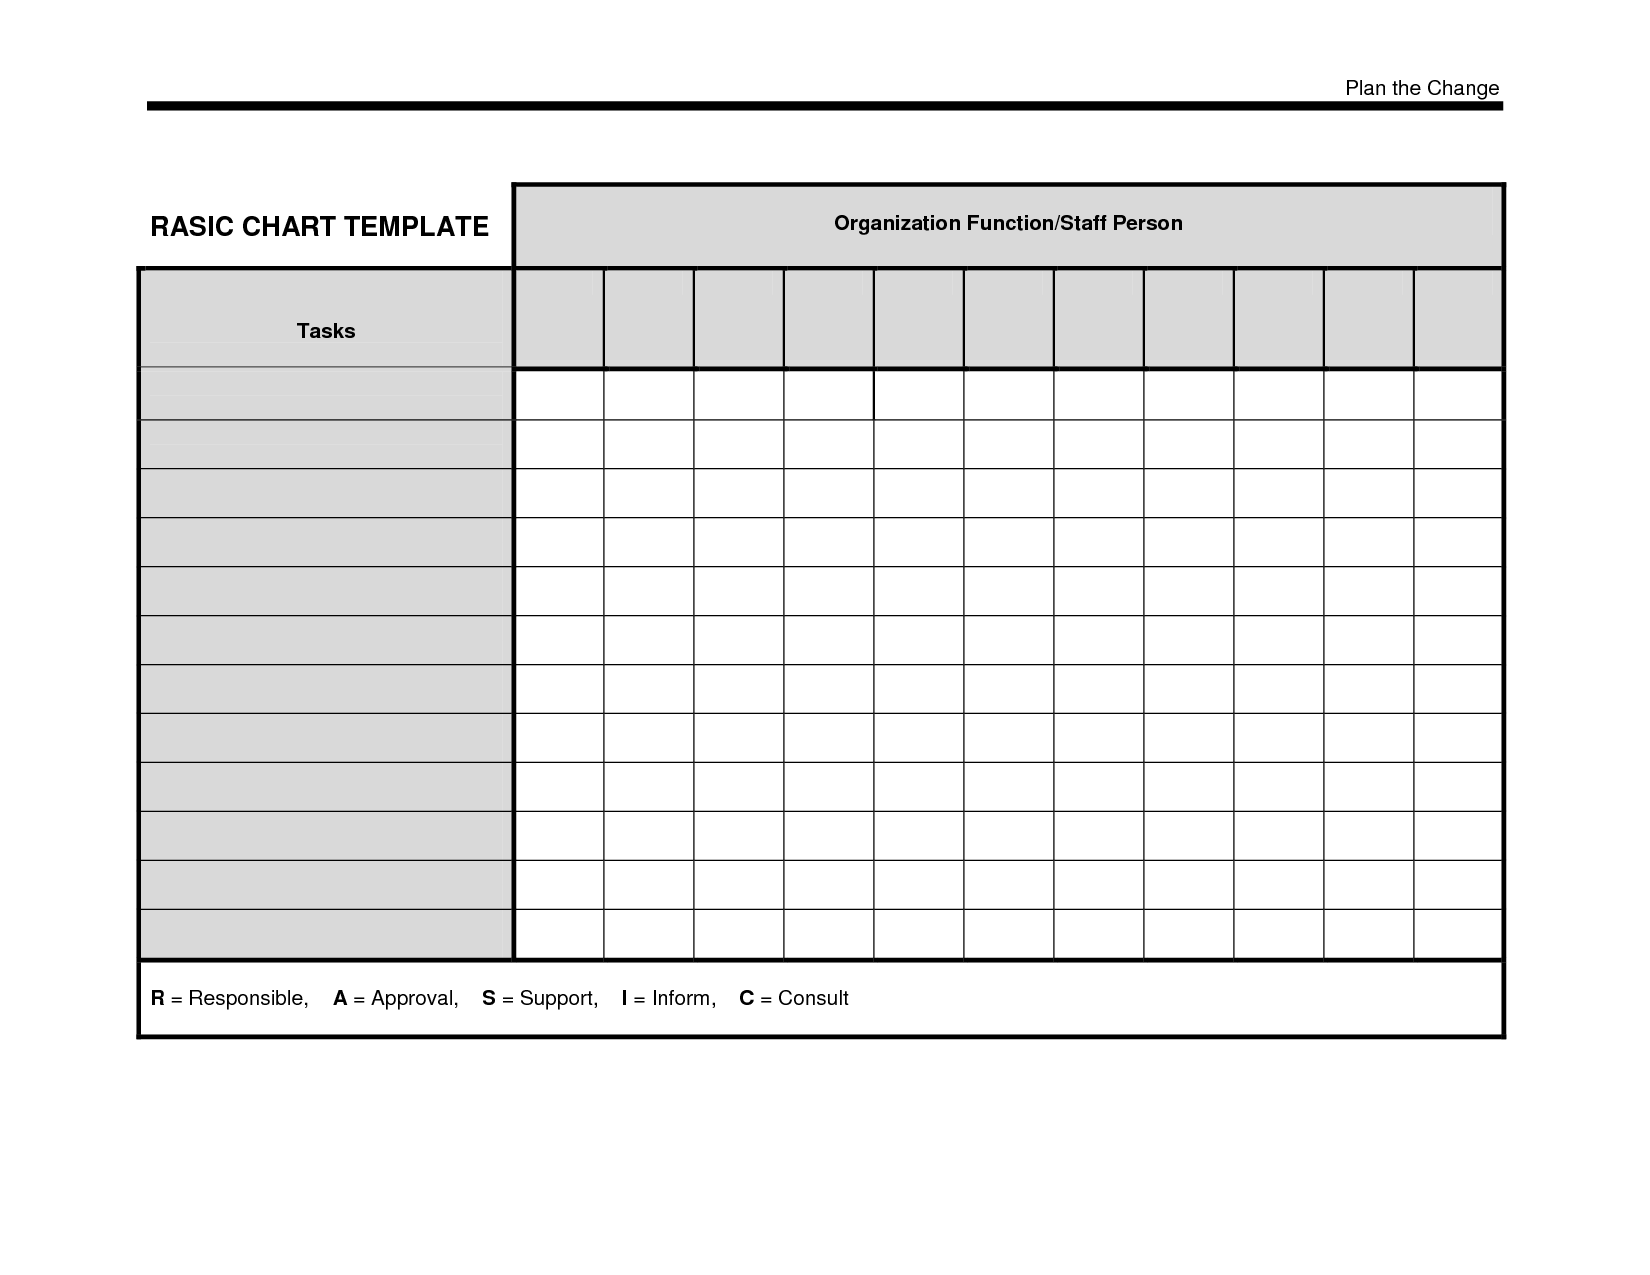 5-best-images-of-free-printable-organizational-templates-free-excel